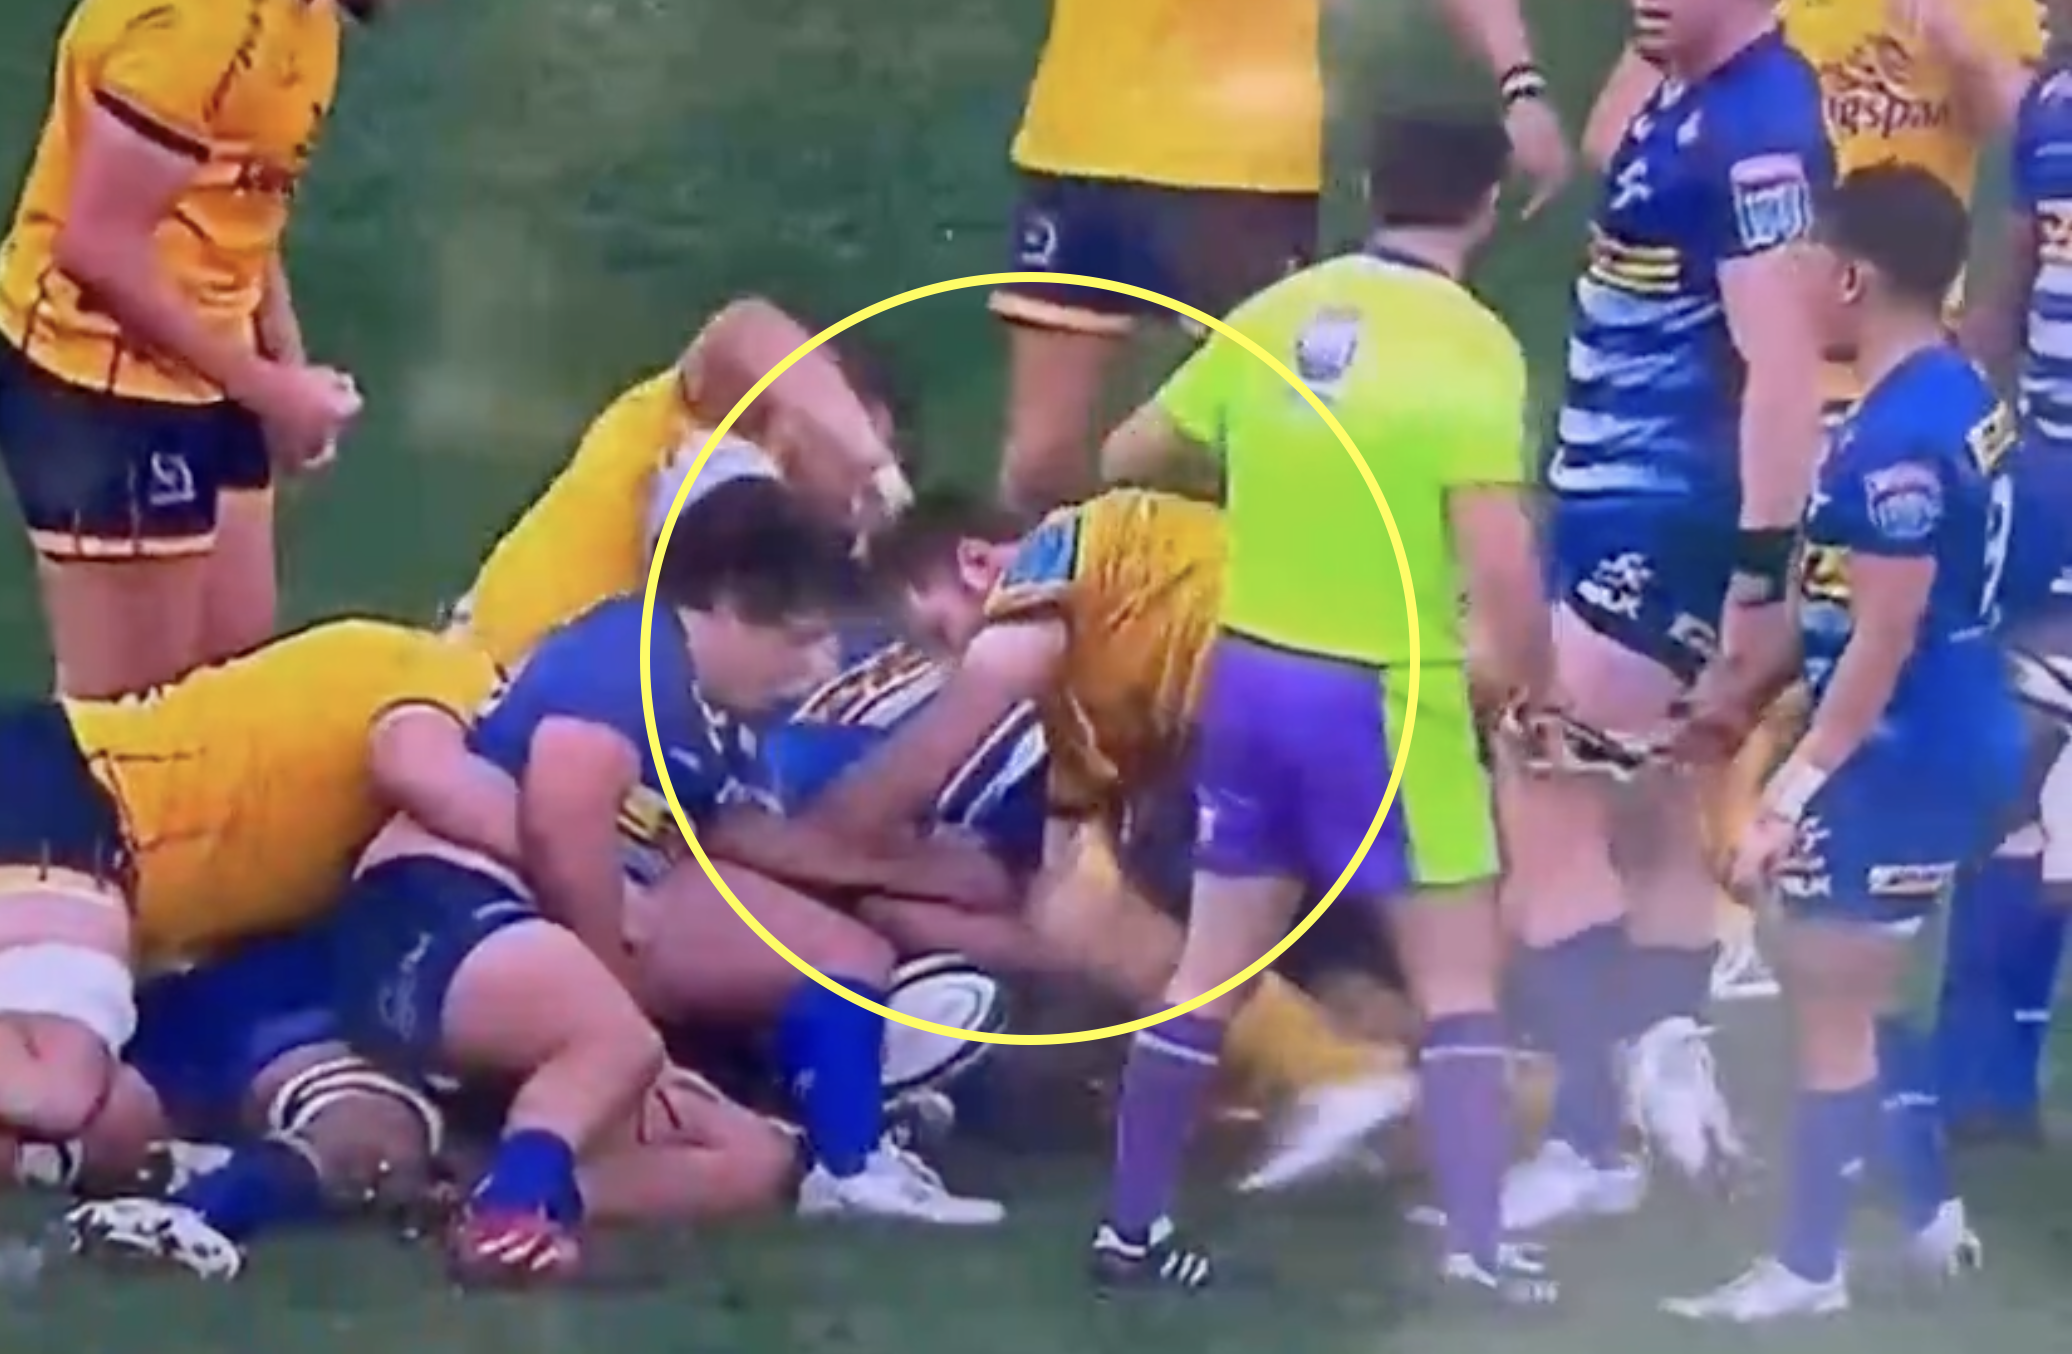 Ulster captain goes to truly disgusting lengths to prevent try